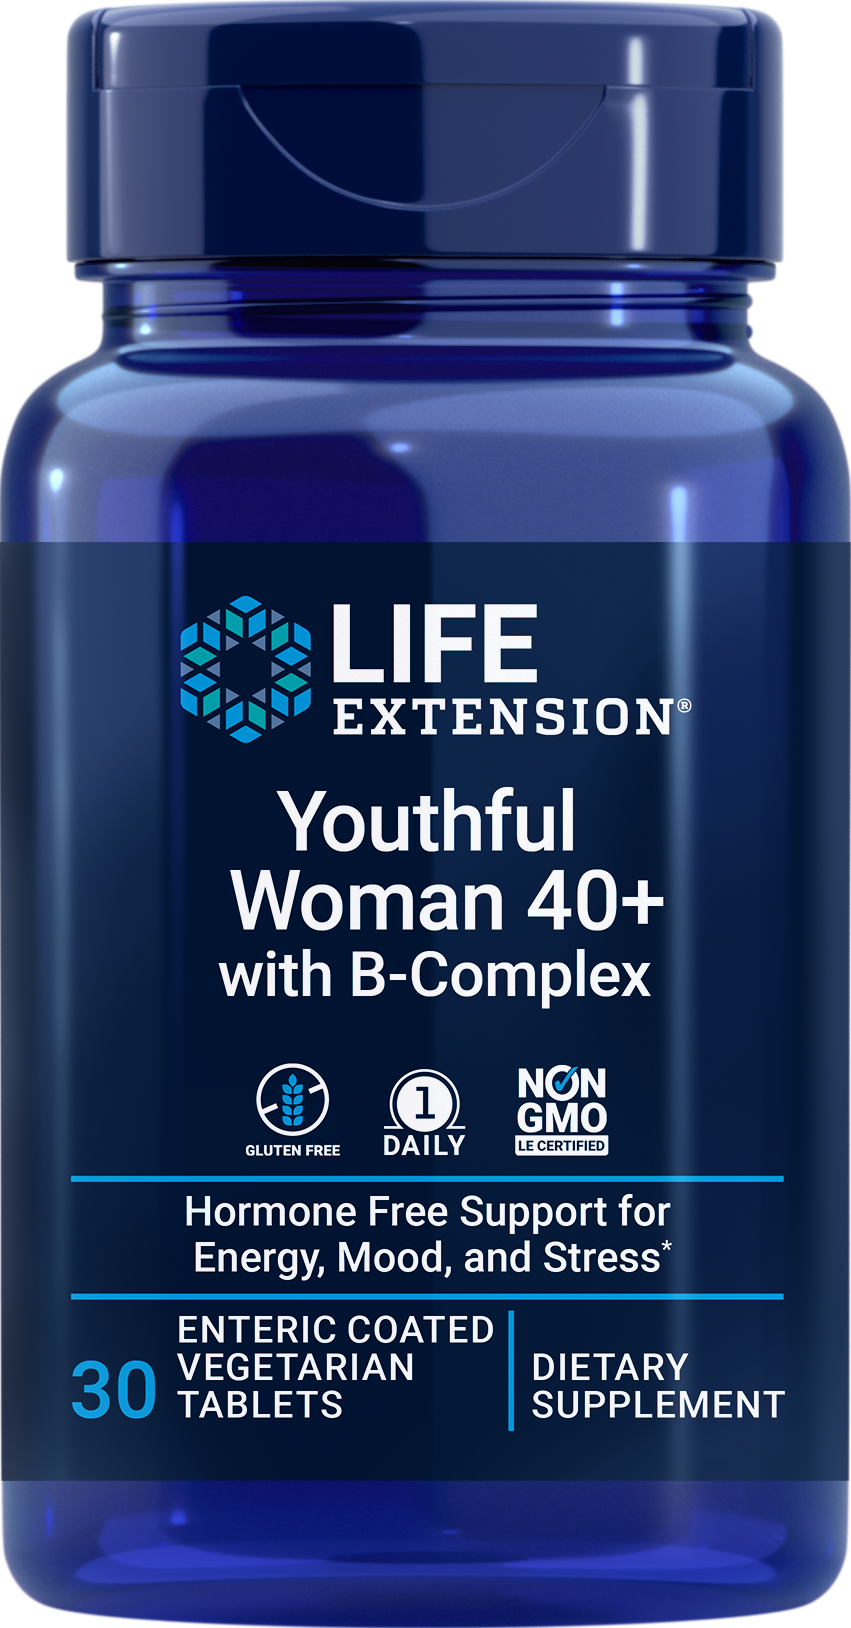 Life Extension new supplement Youthful Woman with 40 plus with B Complex nonGMO hormone free support for energy mood stress item 02507